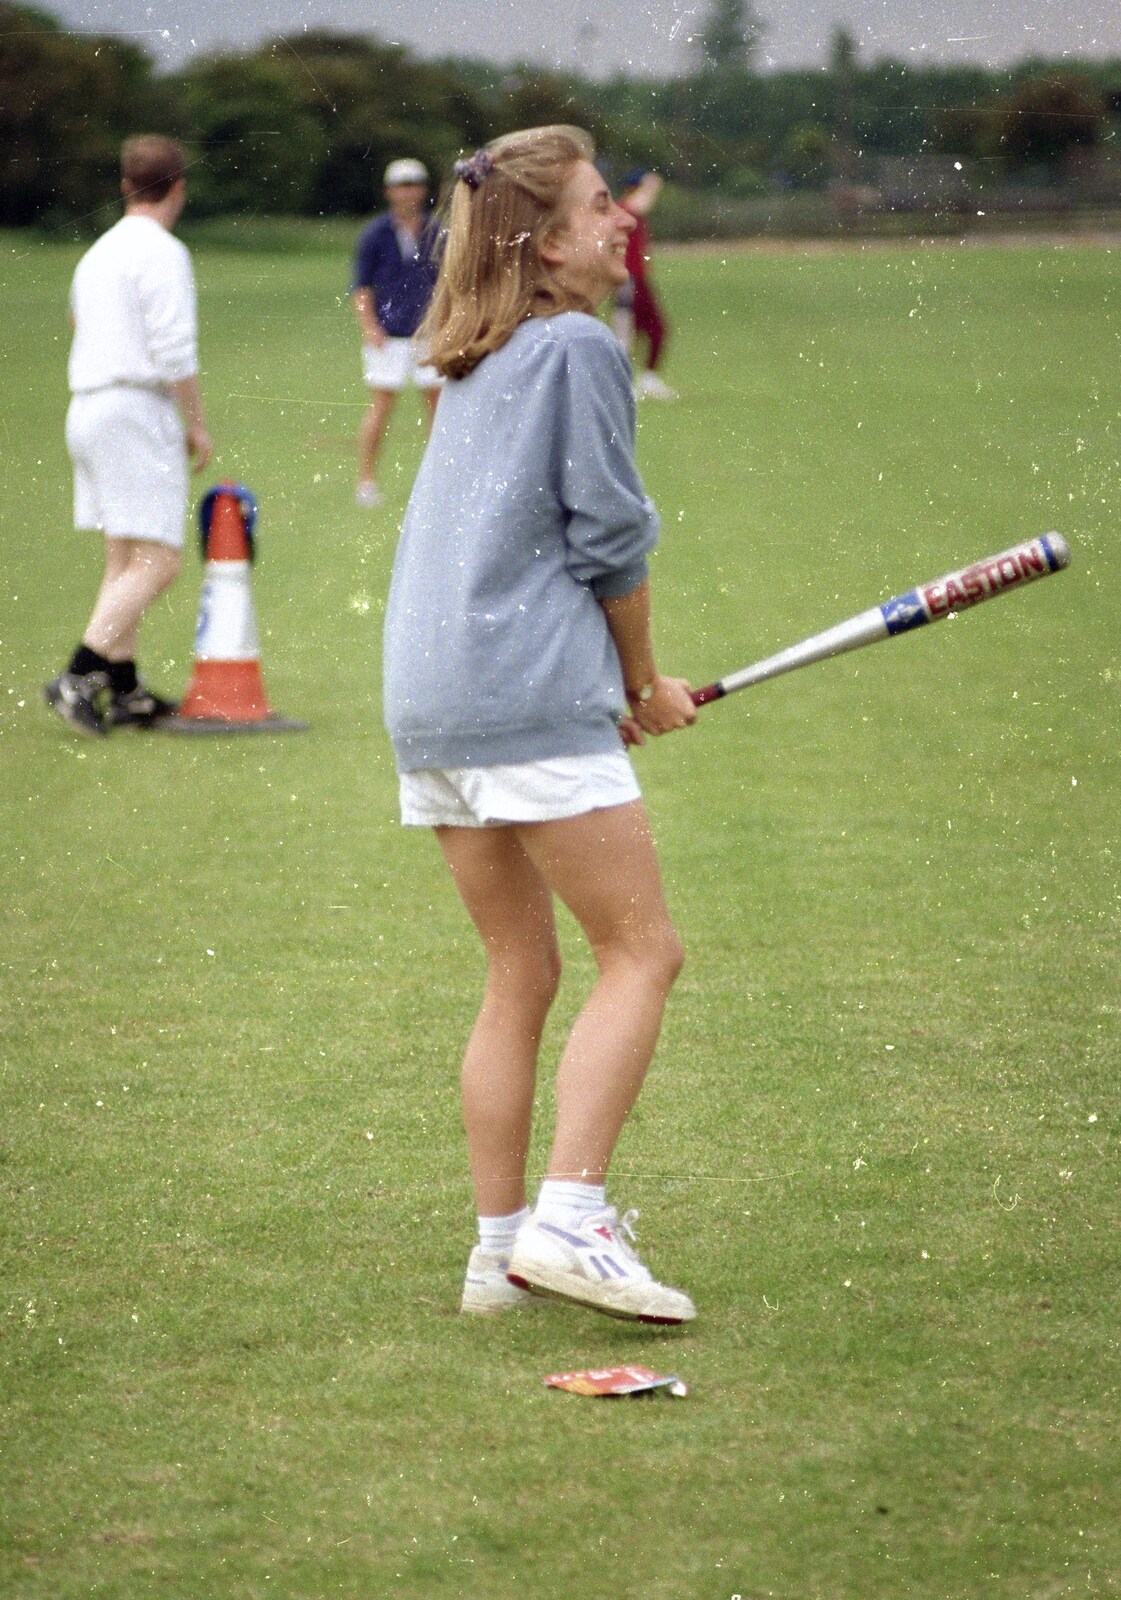 Clays Softball and Printec Reunion, Ditchingham and Stoke Ash, Suffolk - 2nd June 1994: An interesting batting position